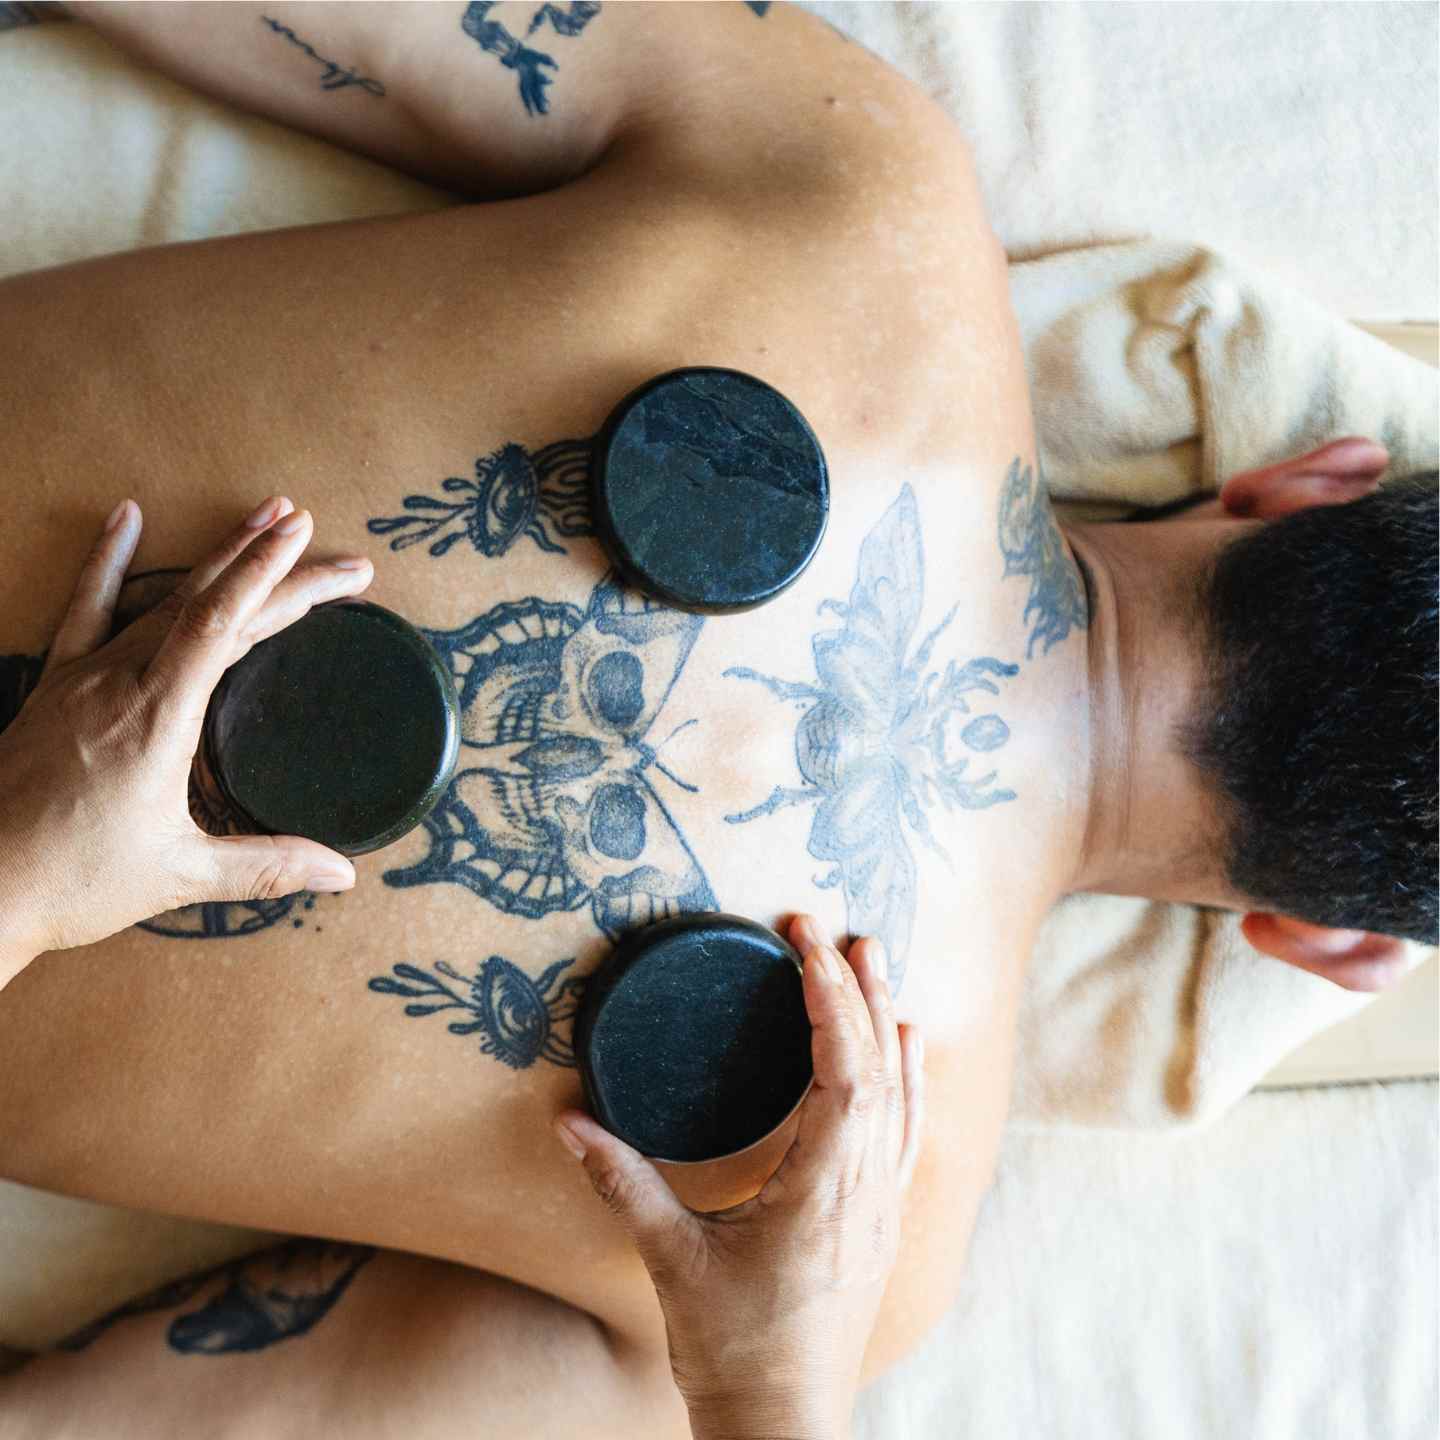 Man with tattoos on back laying on spa bed with black stones on his back